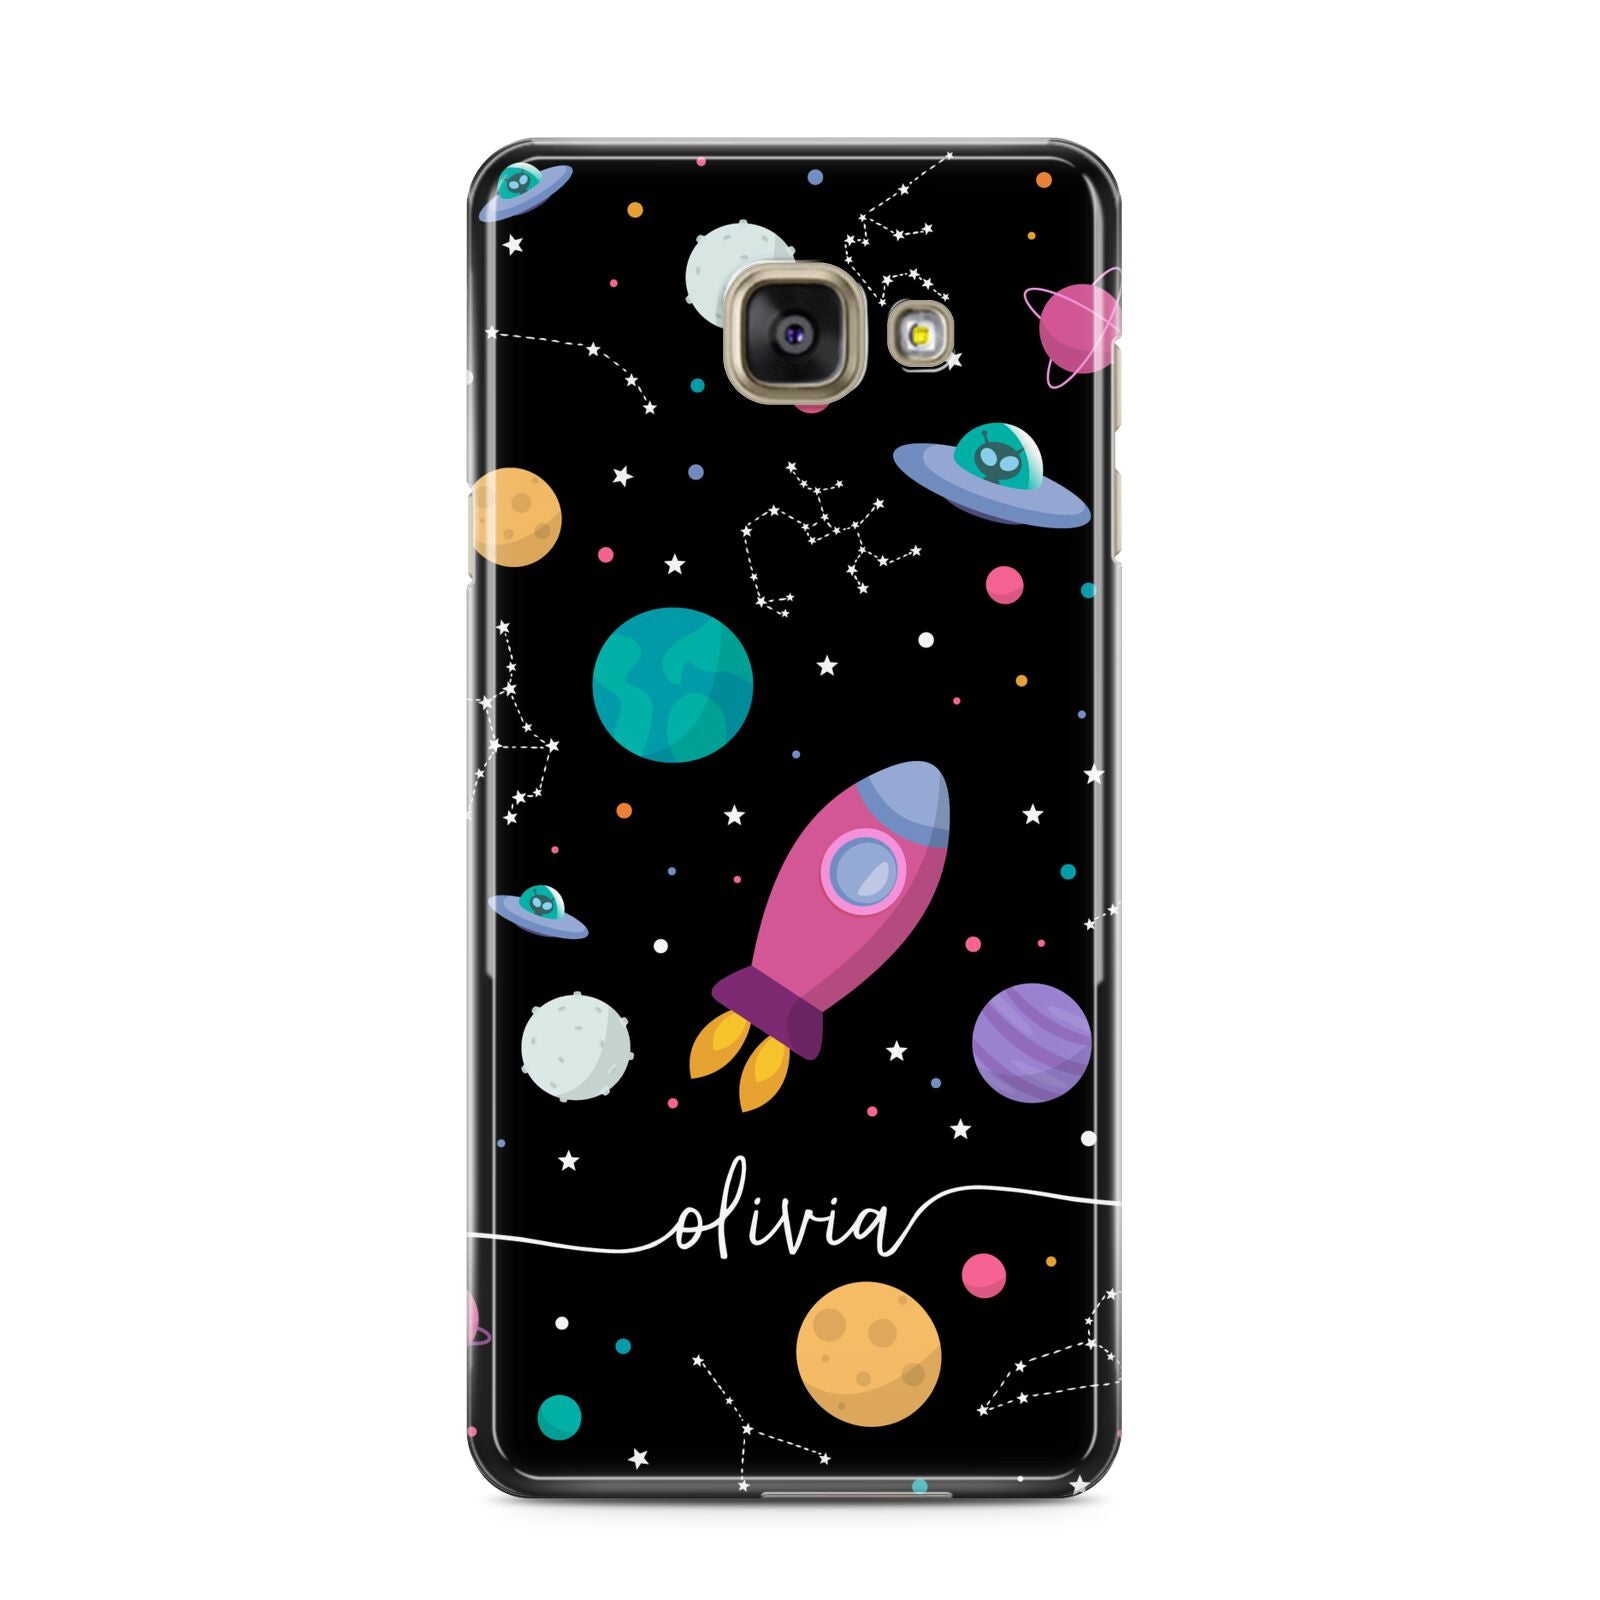 Galaxy Artwork with Name Samsung Galaxy A3 2016 Case on gold phone